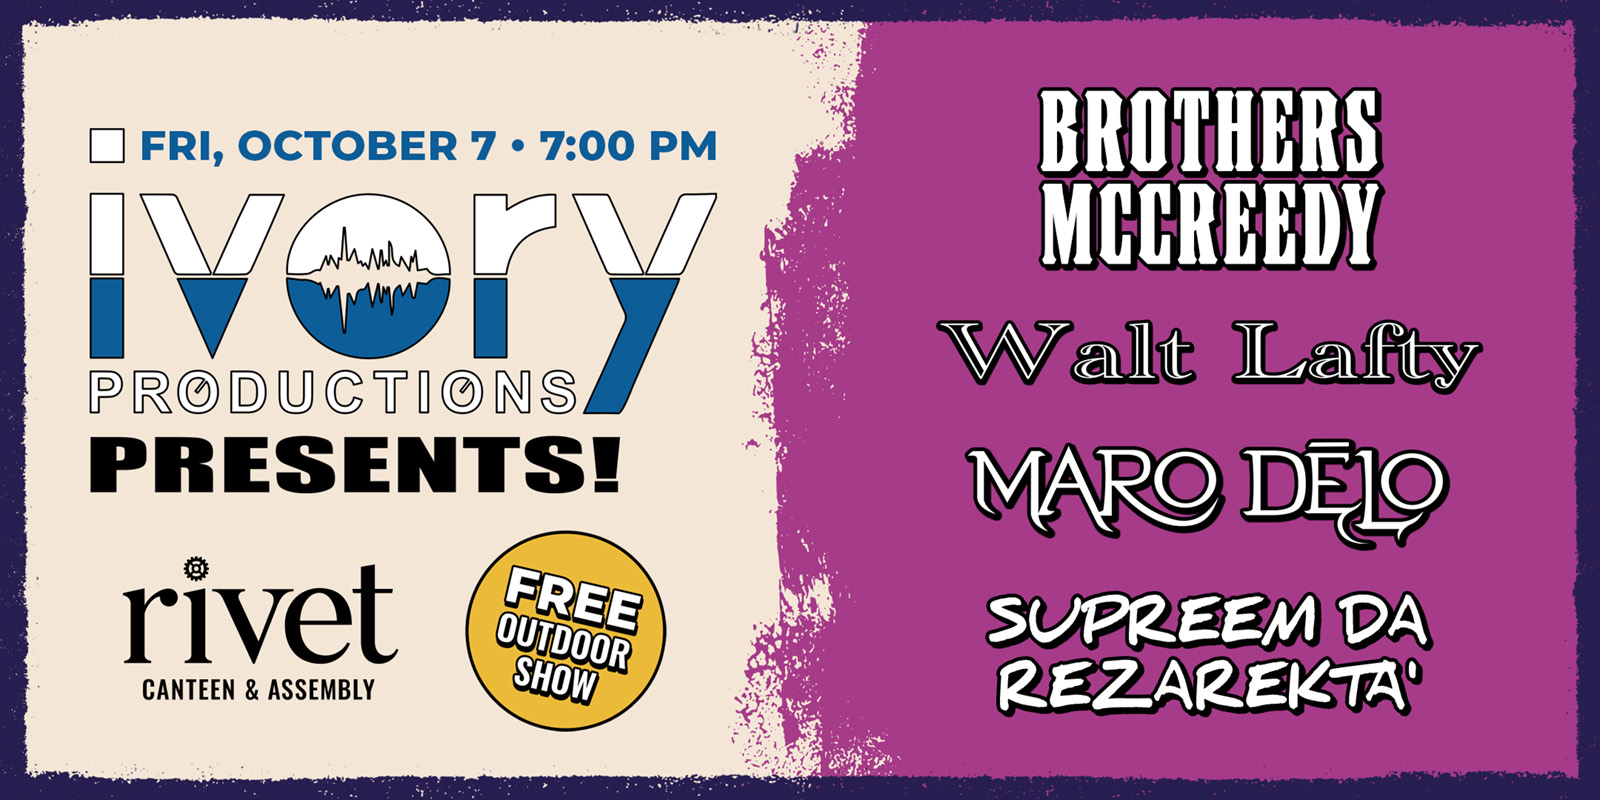 Ivory Presents: FREE Outdoor Show with Four Great Talented Artists: Brothers McCreedy + Walt Lafty + Maro Delo + Supreem Da Rezarekta! Event on Friday, October 7th, 2022.